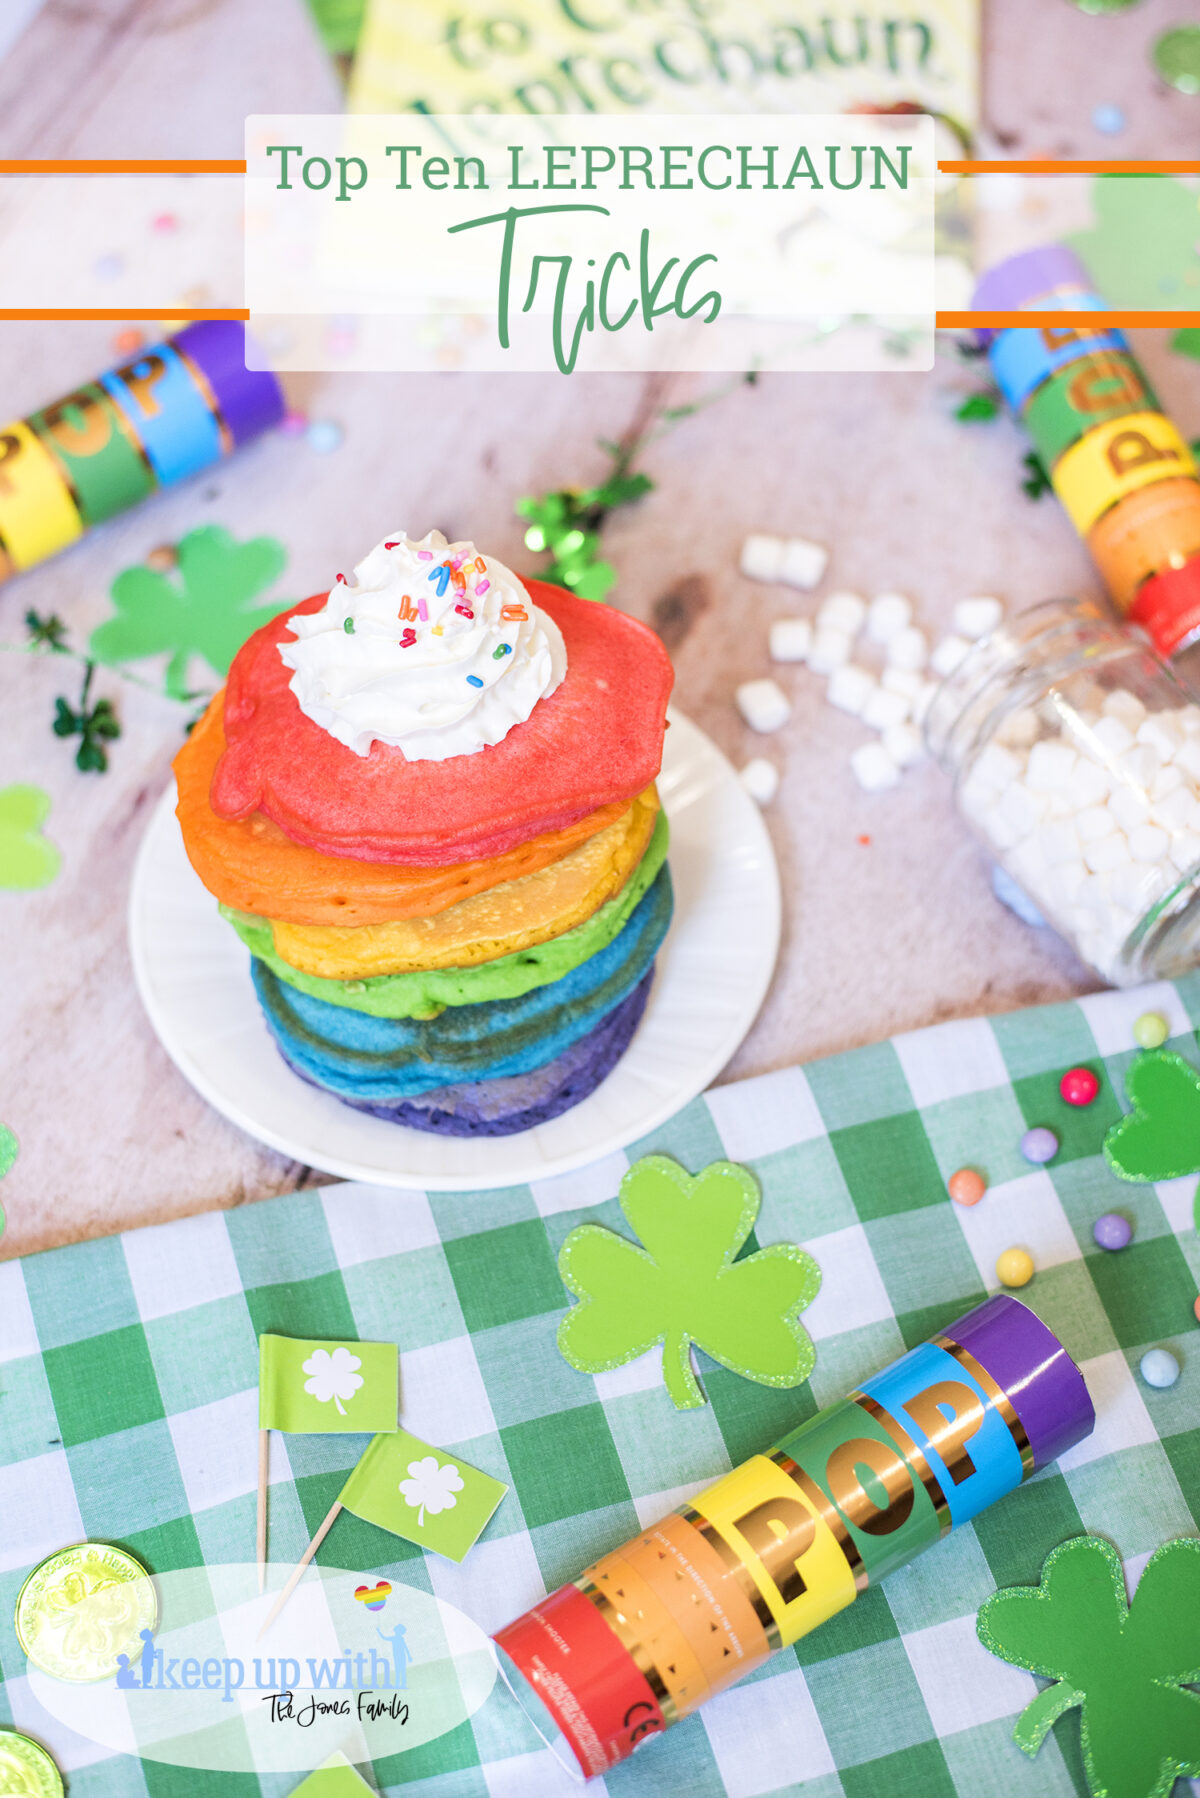 Top ten leprechaun tricks for st. patricks day. Image shows stack of rainbow pancakes on top of a St. Patrick's day tablescape.  Green checkered gingham tablecloth, leprechaun gold and rainbow confetti cannons.  There are little green flags featuring white shamrocks and glittery card shamrocks, rainbow coloured sweets and candies and a jar of spilled marshmallows. 